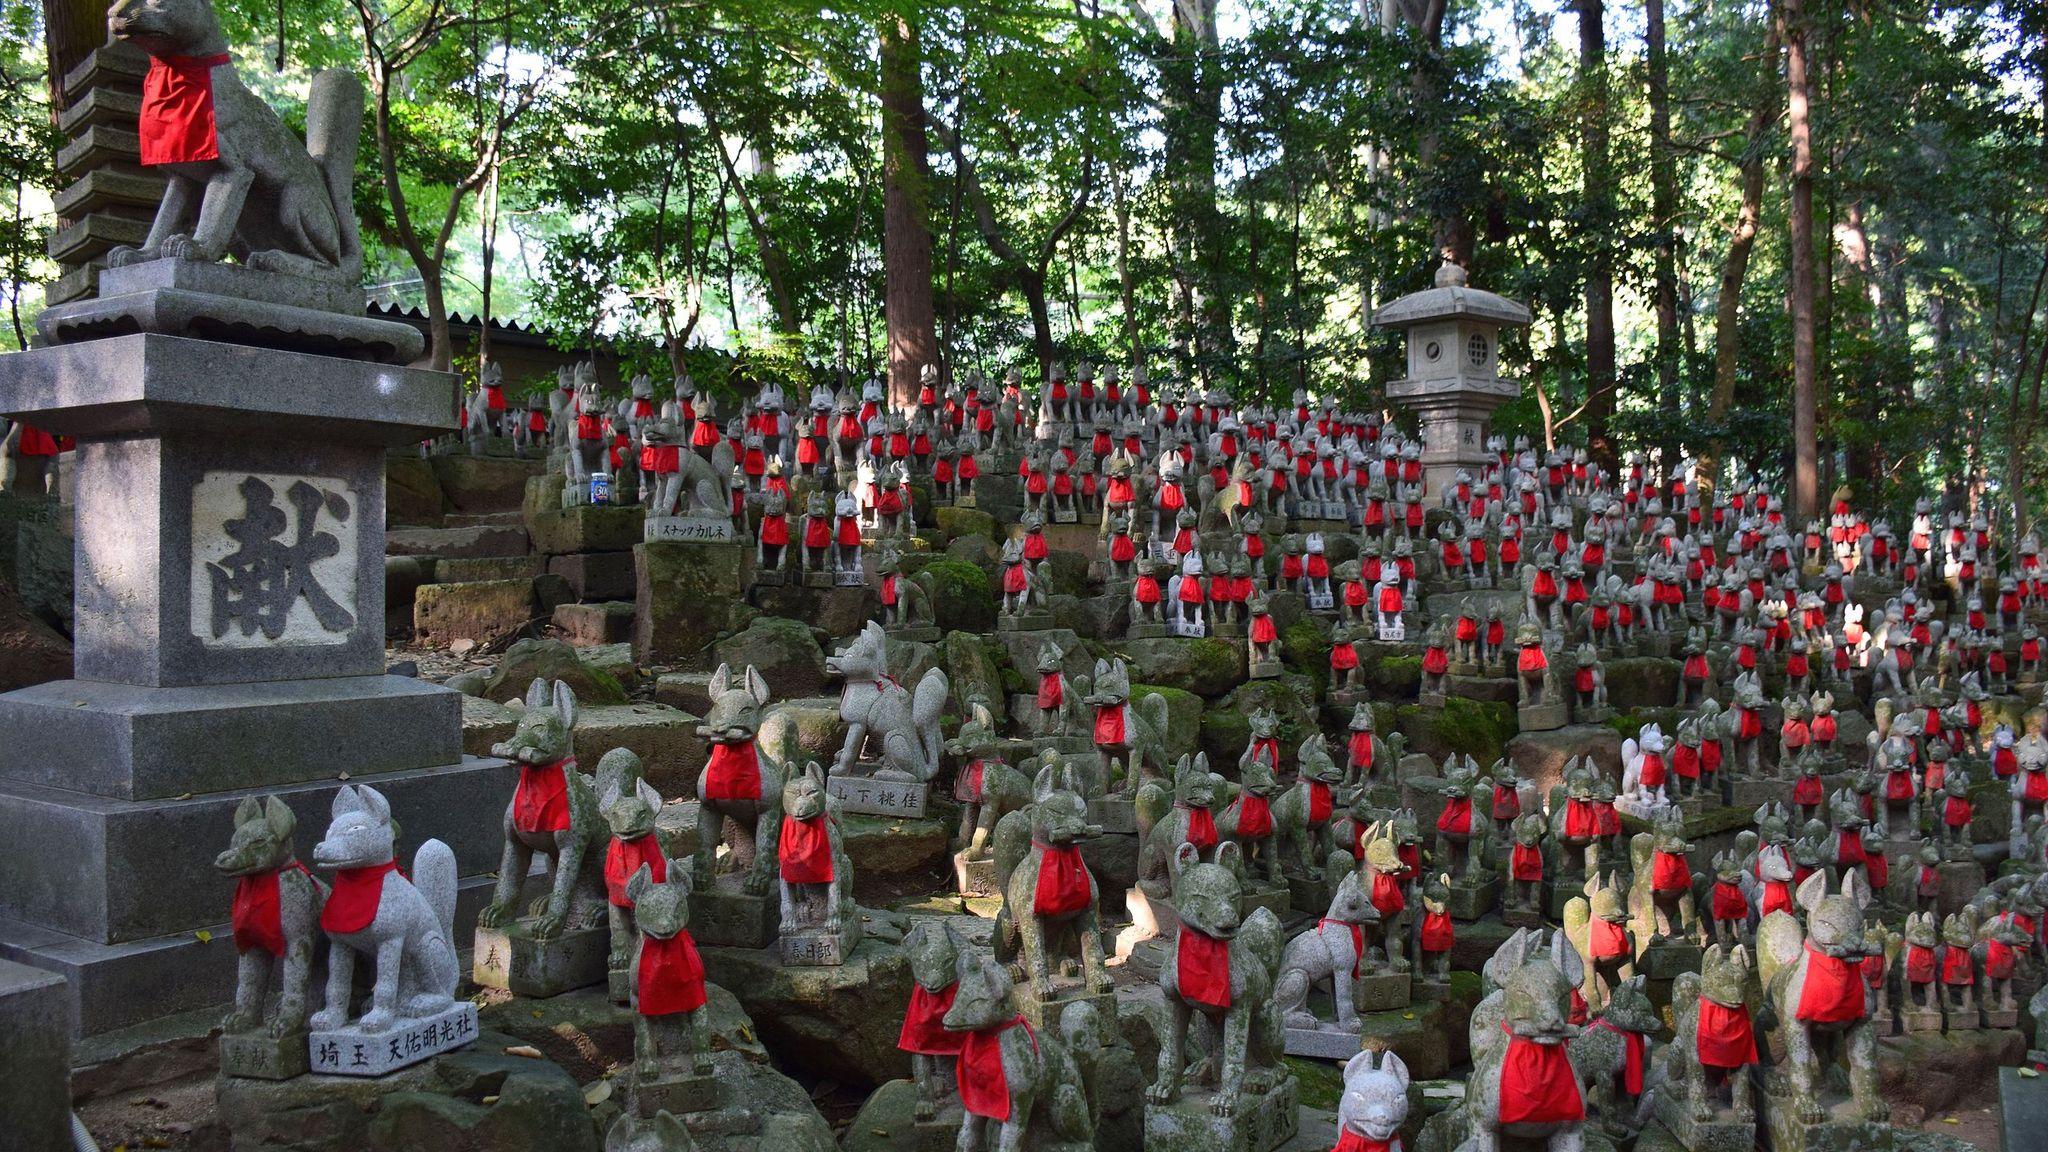 The Reikozuka, featuring fox (kitsune) statues deposited by devotees in 